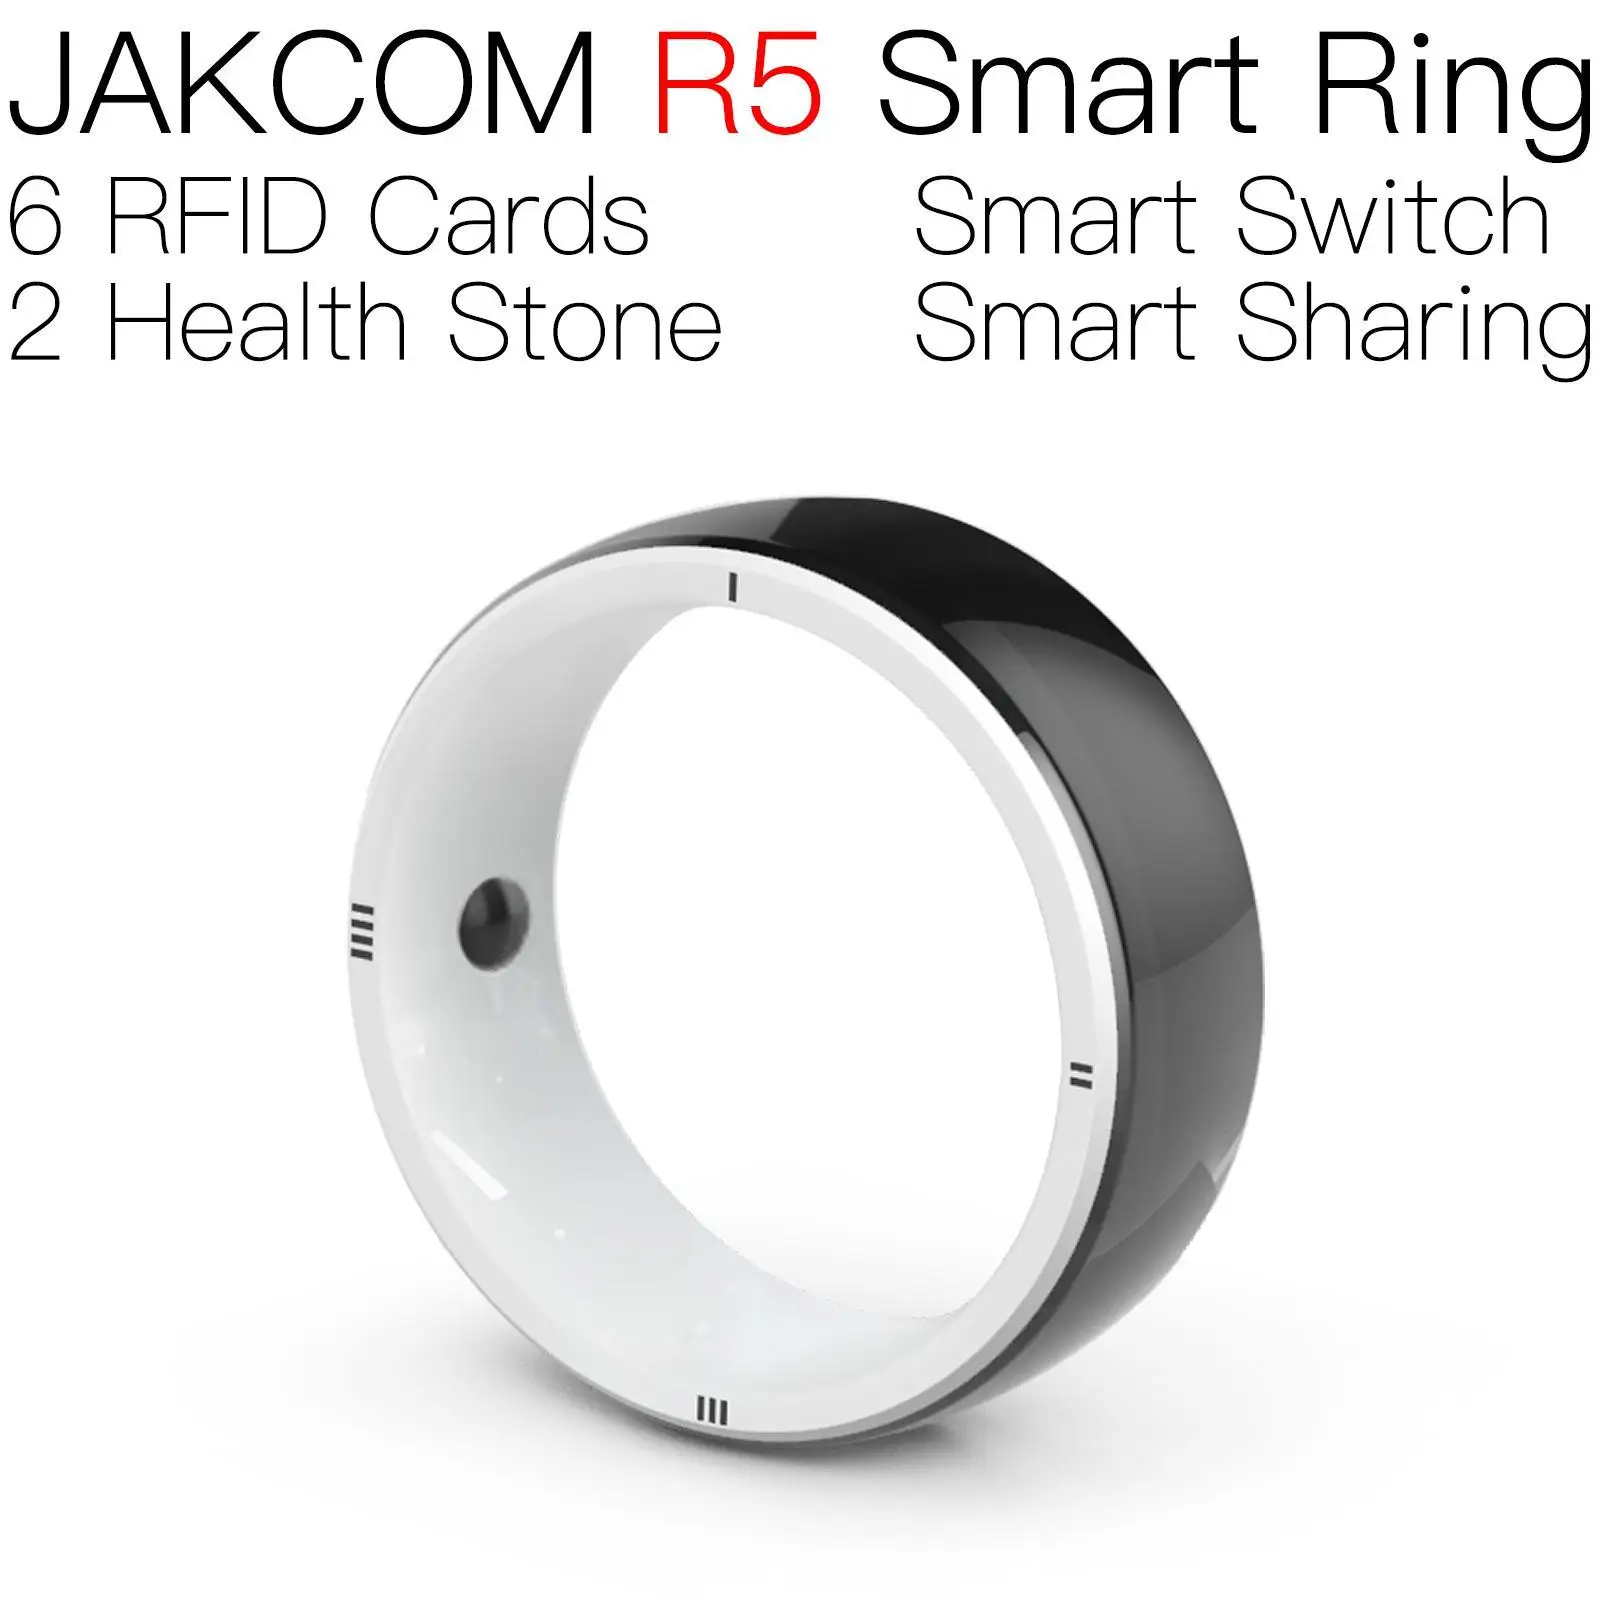 

JAKCOM R5 Smart Ring New arrival as programmable rfid tags uid changeable card tag thank you nfc long range chip amibo odyssey